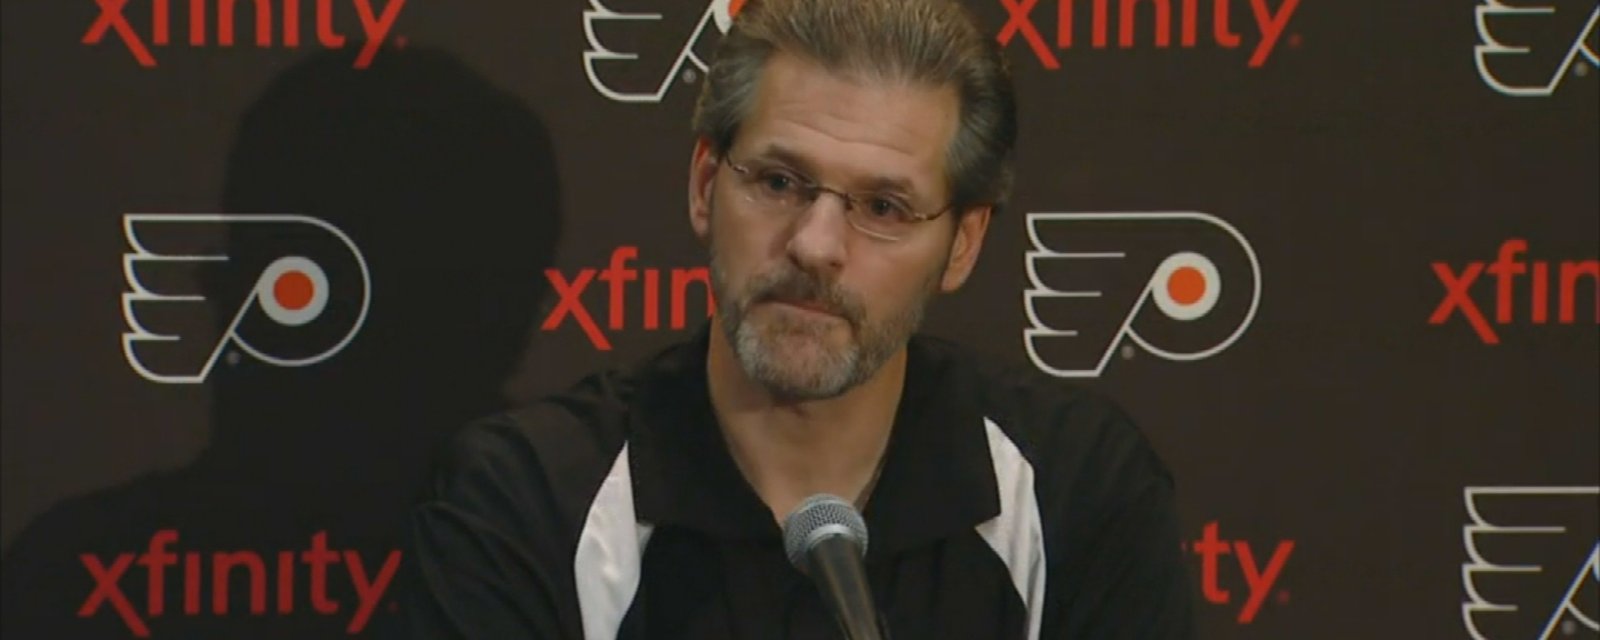 Hextall makes stunning comments on why and how the Flyers fired him 